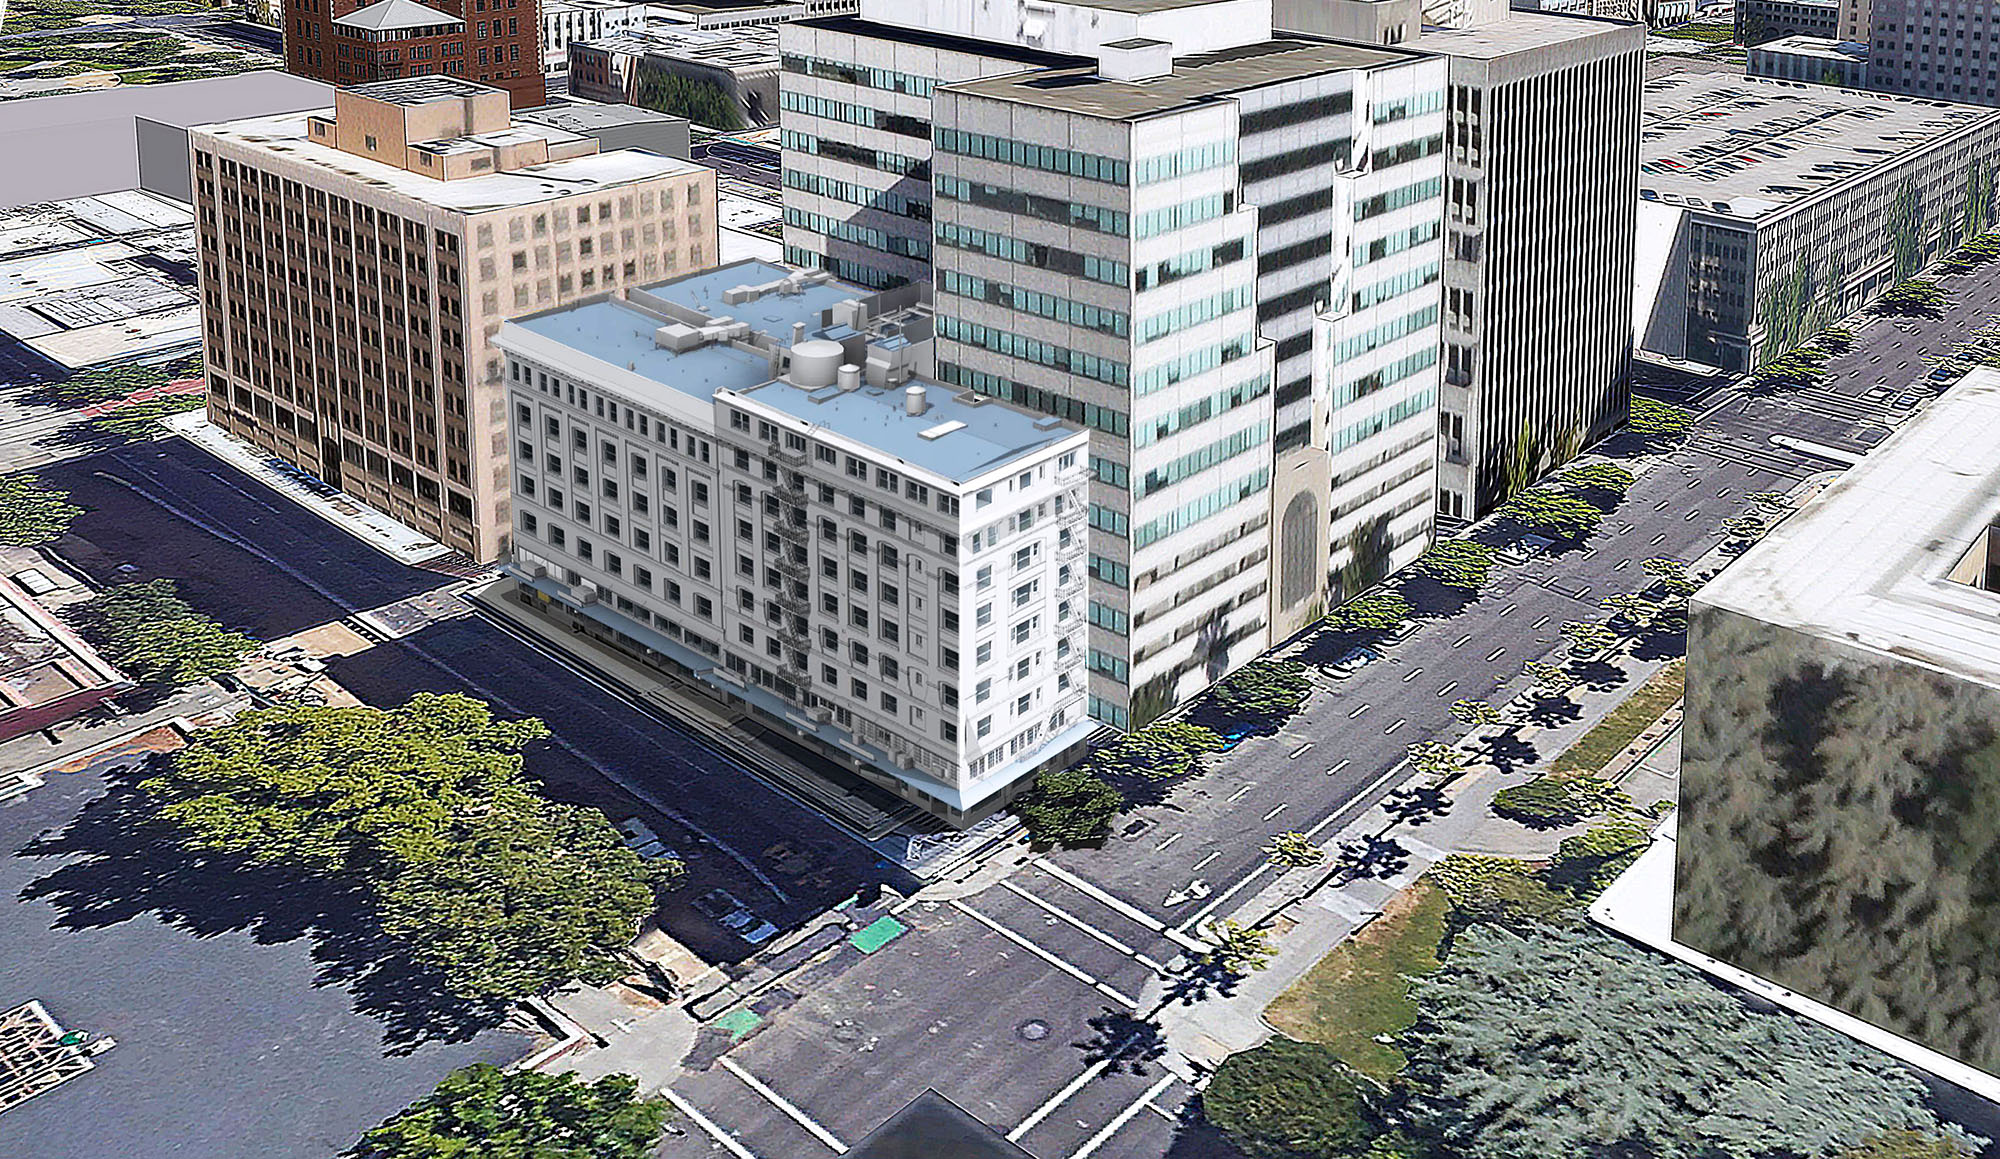 Page & Turnbull’s largest affordable housing project is a conversion of Sacramento’s Capitol Park Hotel